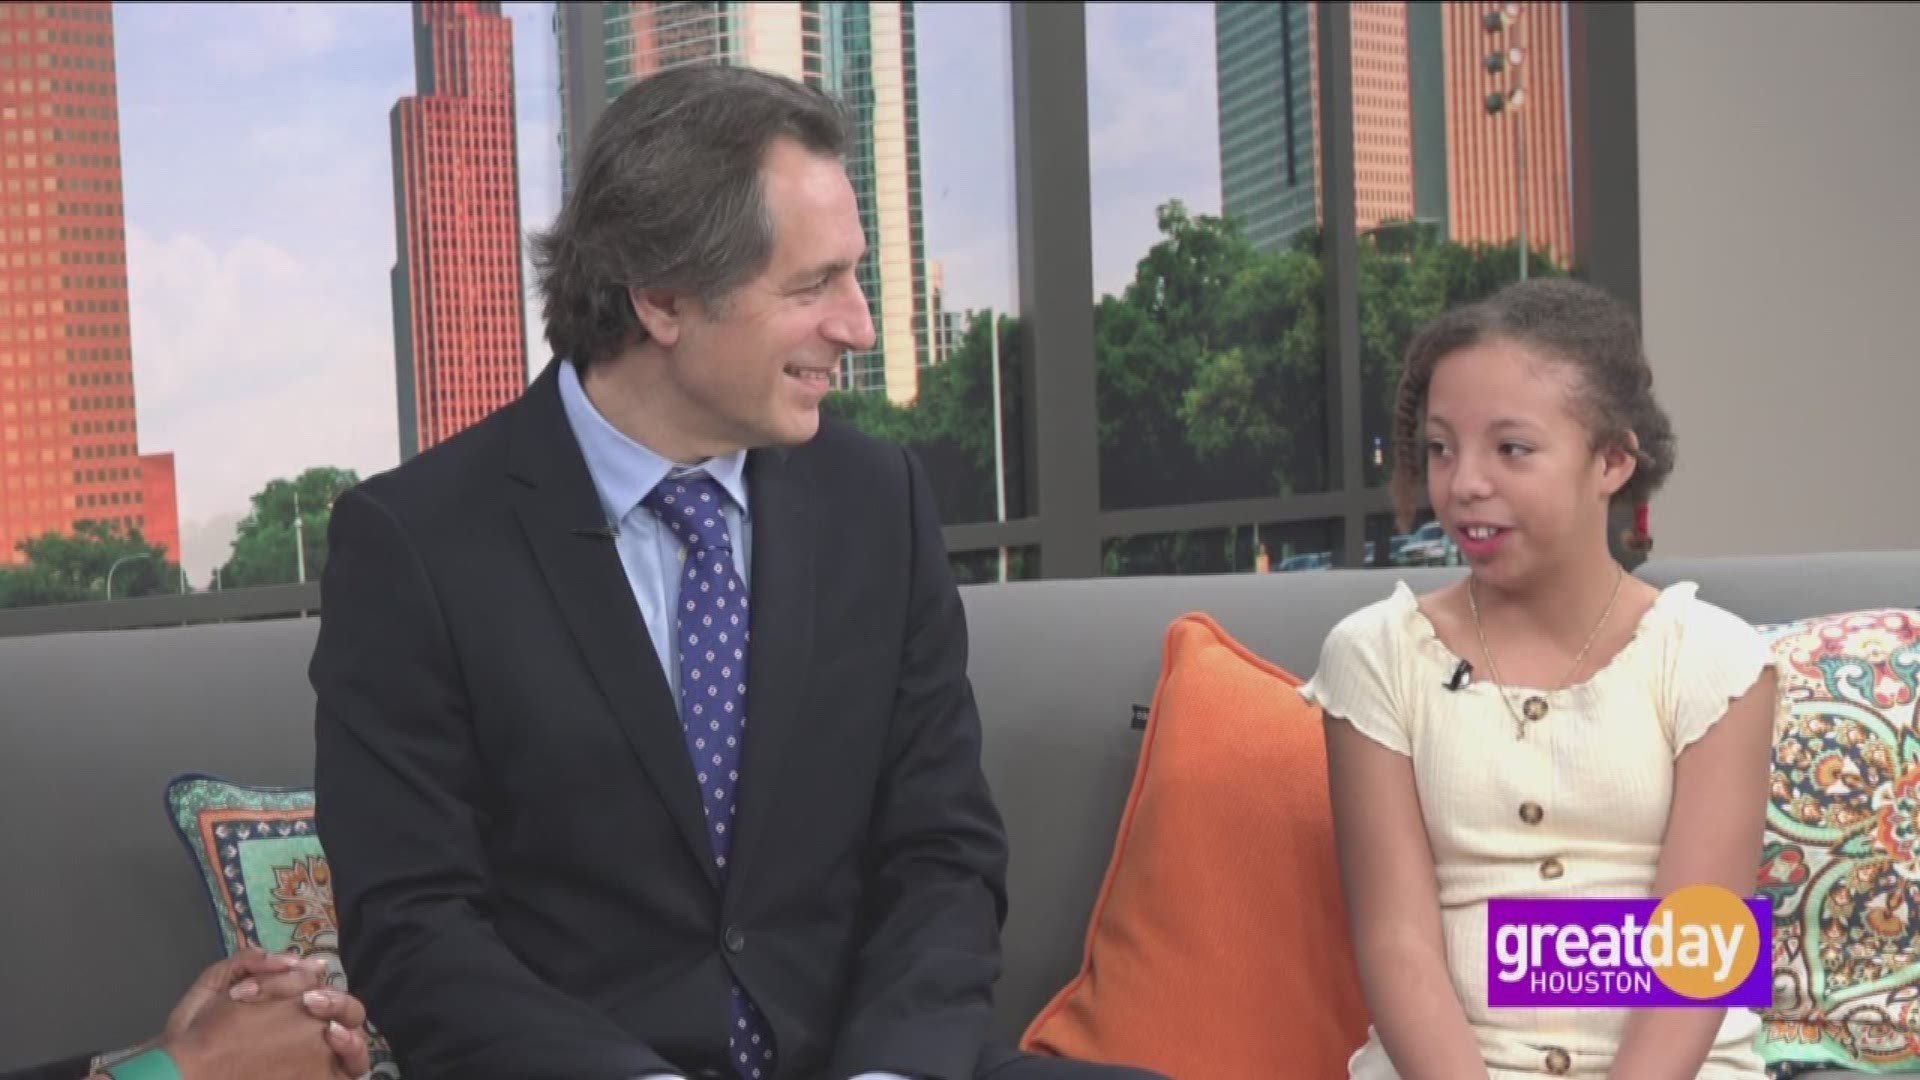 Dr. Julio Arroyo explains how corneal molding helps patients see clearly without glasses, surgery or contacts.